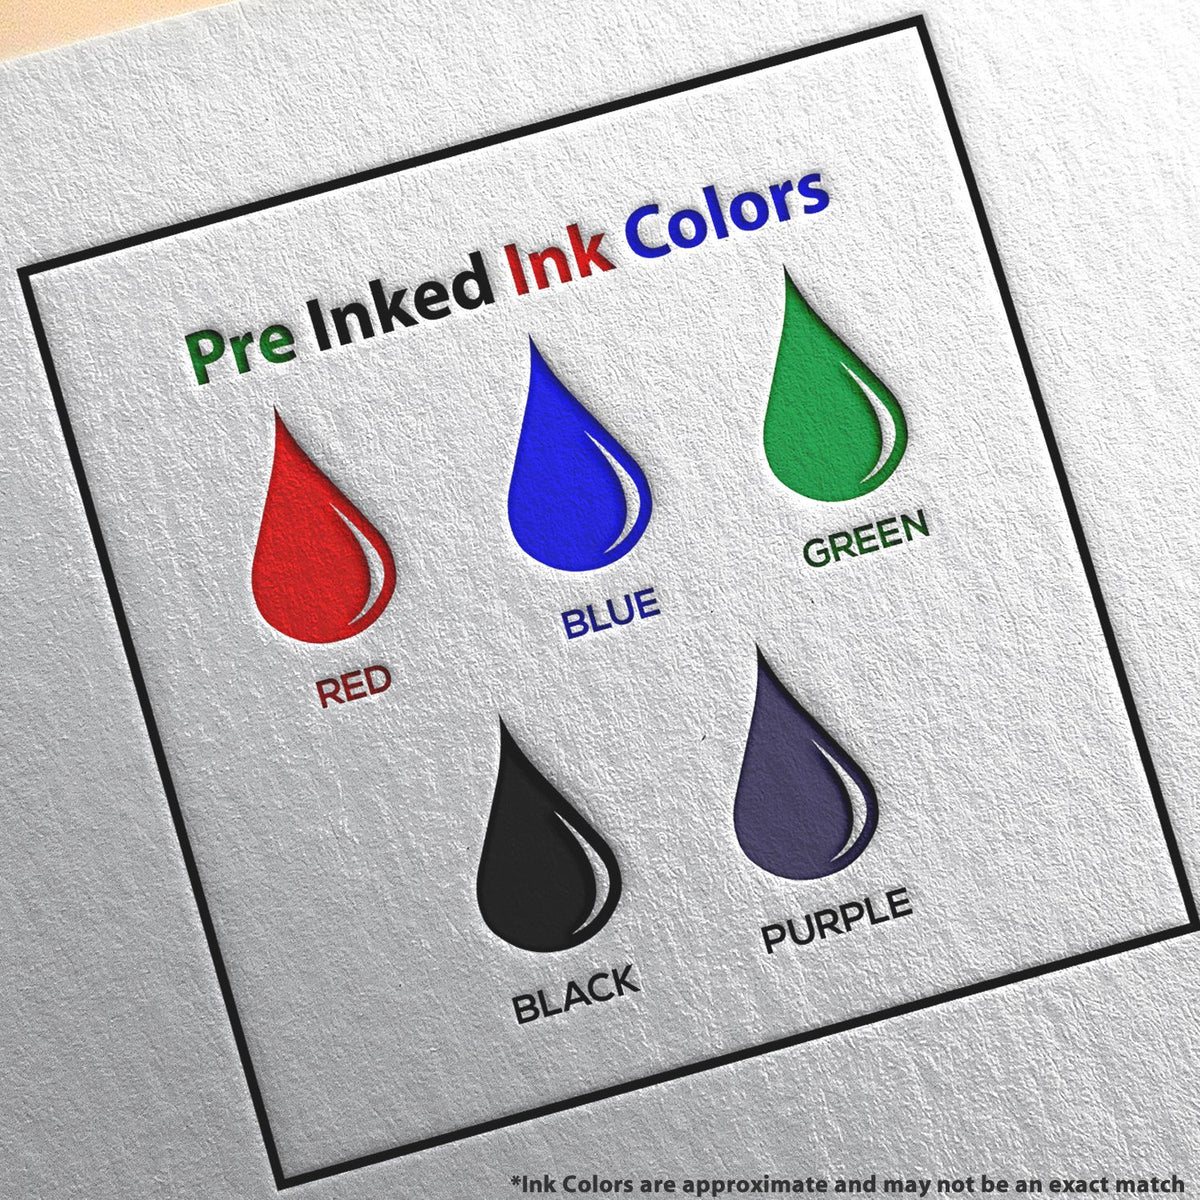 A picture showing the different ink colors or hues available for the Premium MaxLight Pre-Inked Ohio Landscape Architectural Stamp product.